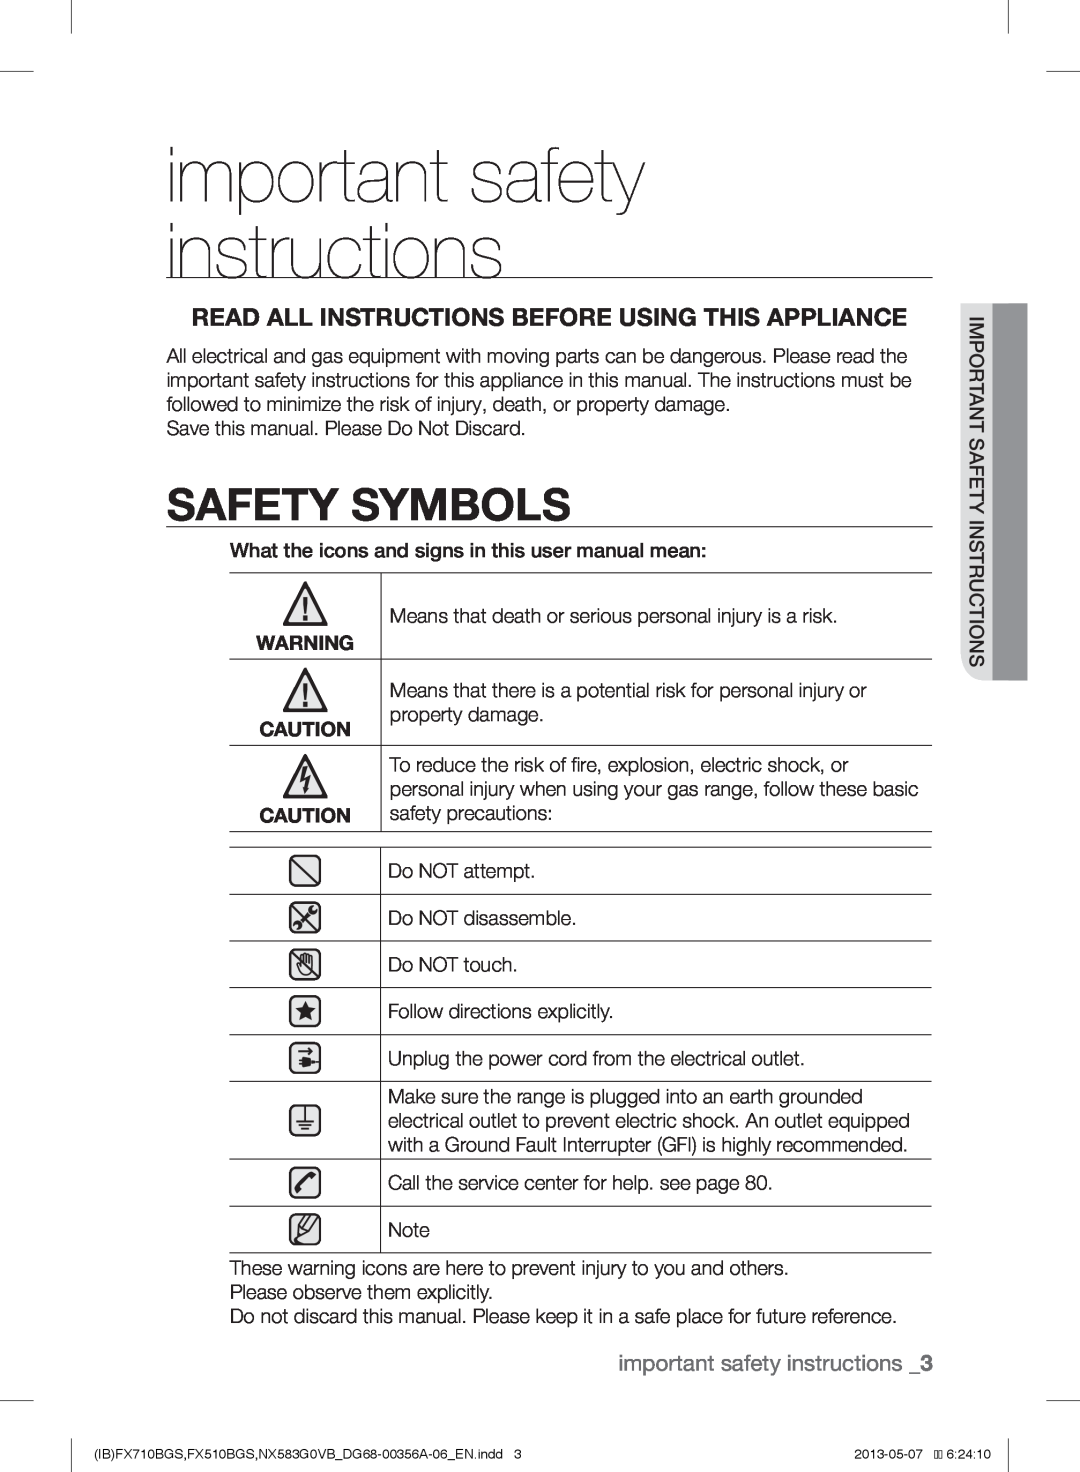 Samsung NX583GOVBBPKG Safety Symbols, important safety instructions, Read All Instructions Before Using This Appliance 